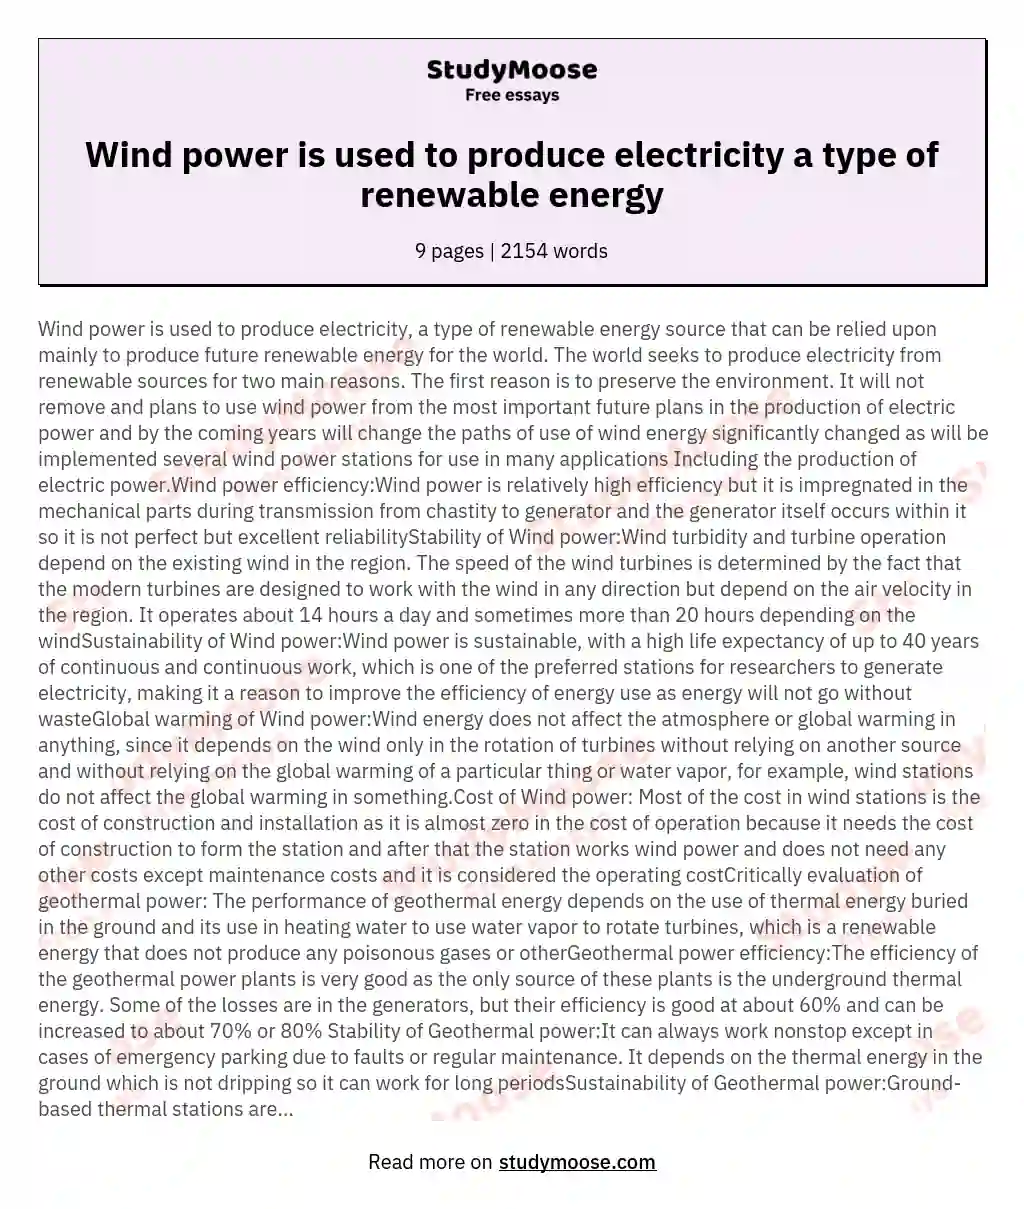 Wind power is used to produce electricity a type of renewable energy